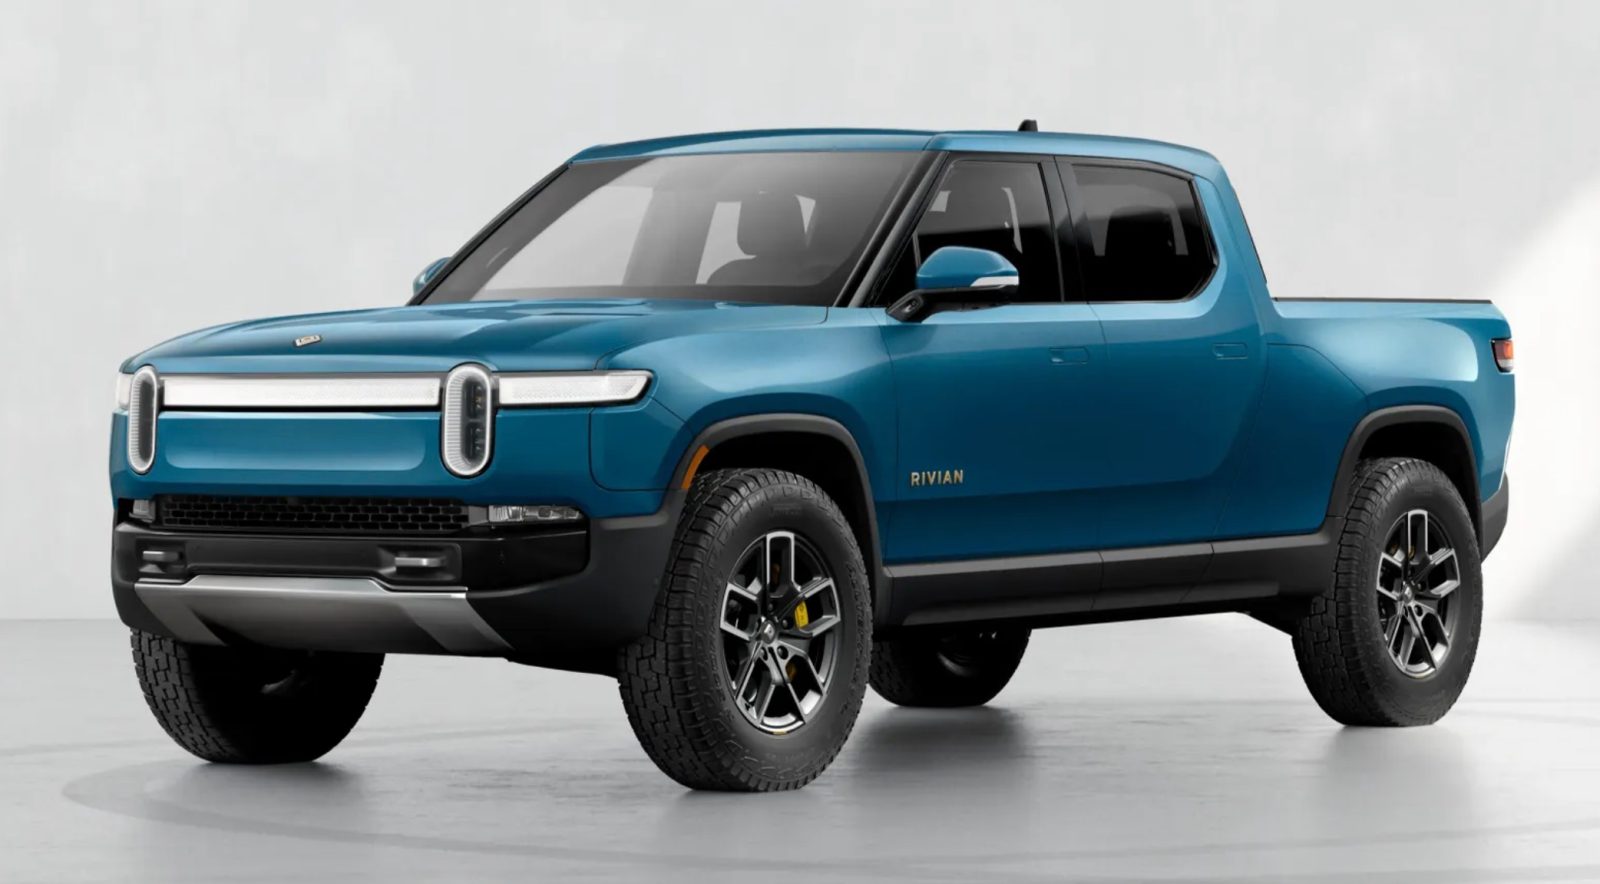 Rivian R1T electric truck spotted in South Korea battery supplier or